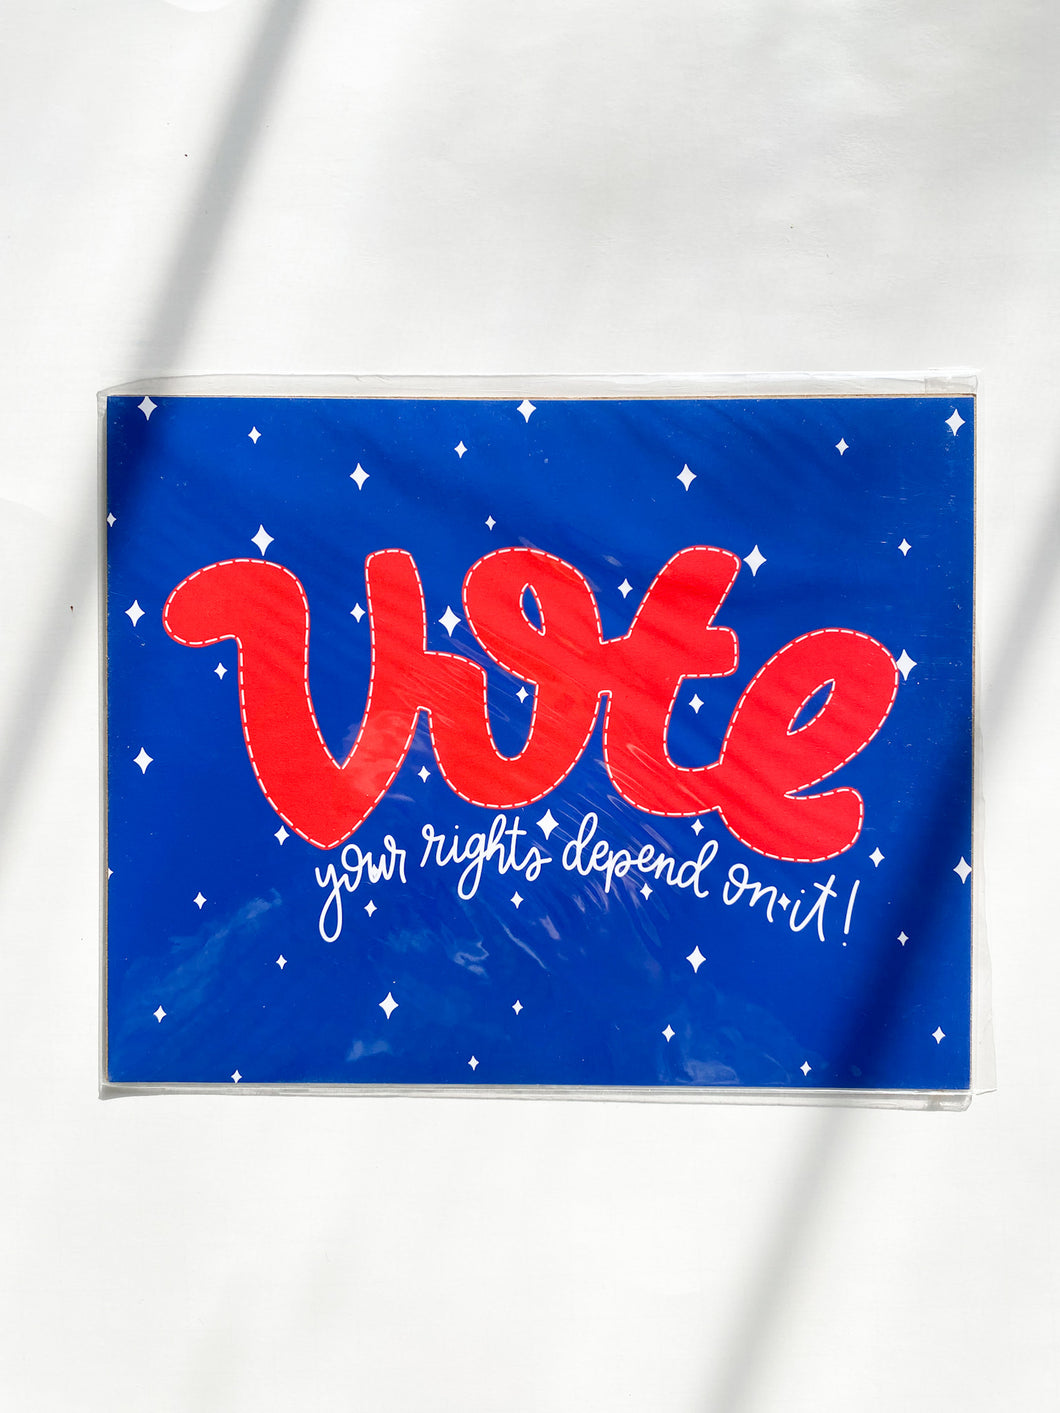 VOTE: Your rights depend on it! Print